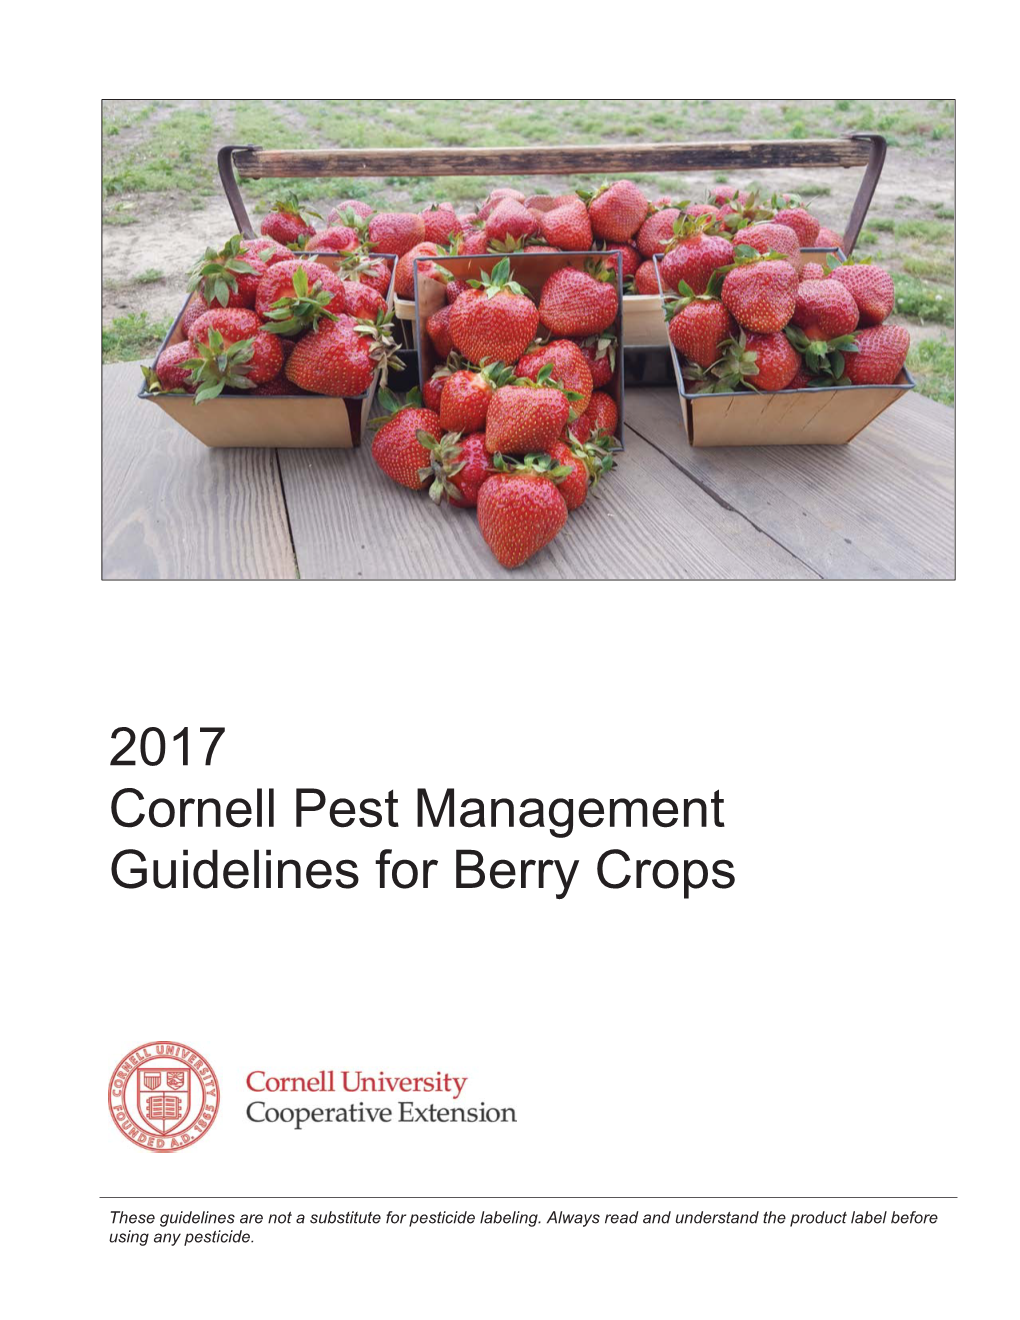 2017 Cornell Pest Management Guidelines for Berry Crops